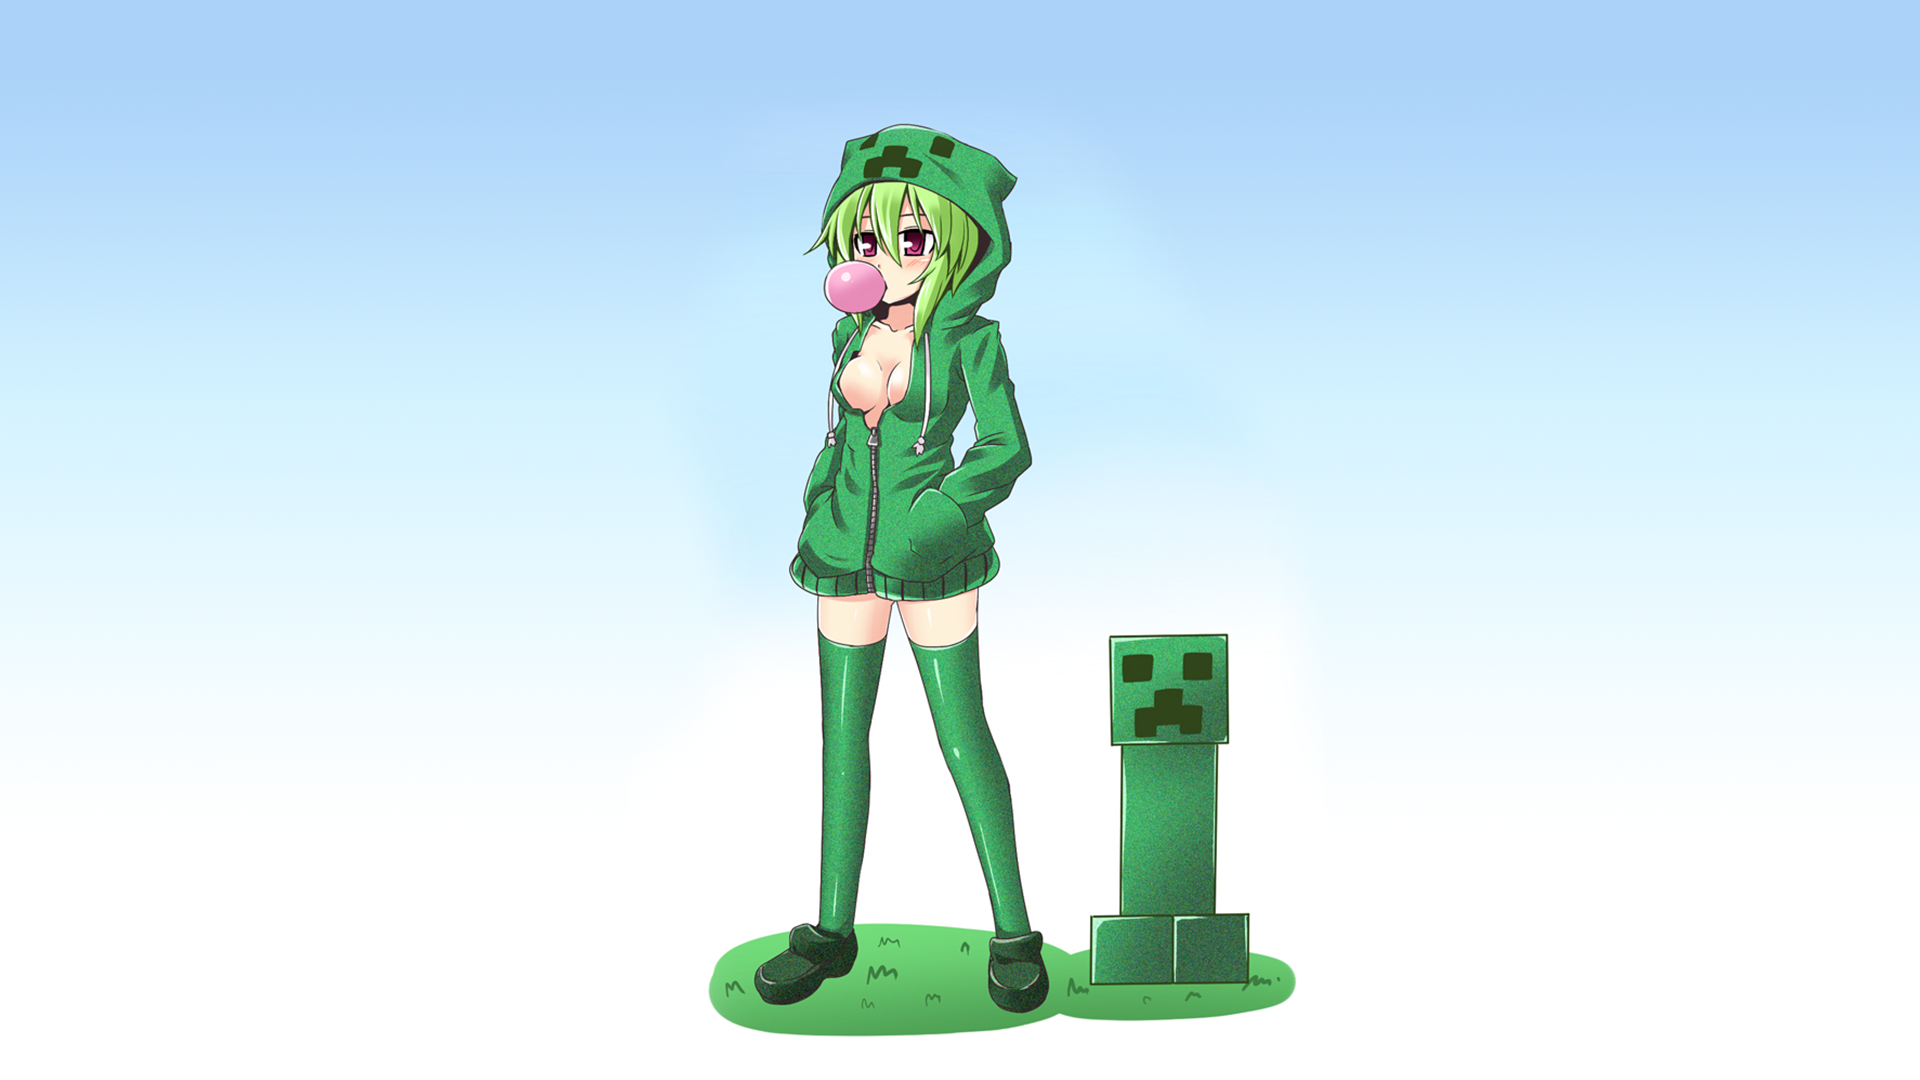 Creeper Standing Boobs Red Eyes Green Hair Minecraft Anime Girls Anime Video Games Pc 